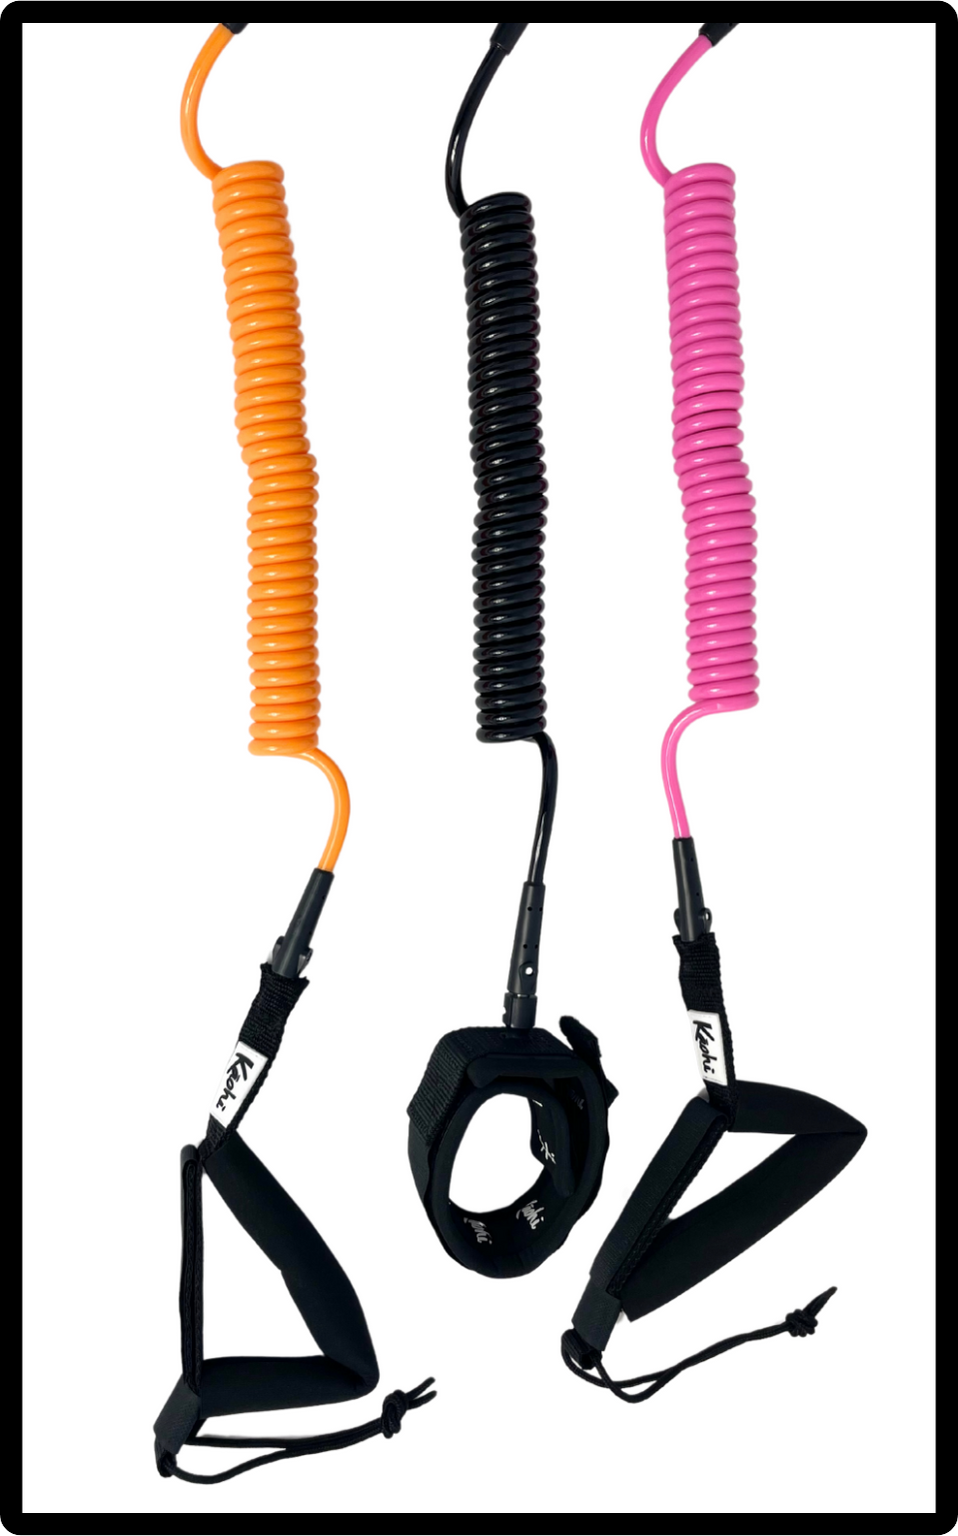 coil surfing leash for SUP , Foil board, Surfboard with GRIP rail saver handle ankle cuff calf cuff Orange, Black, Pink